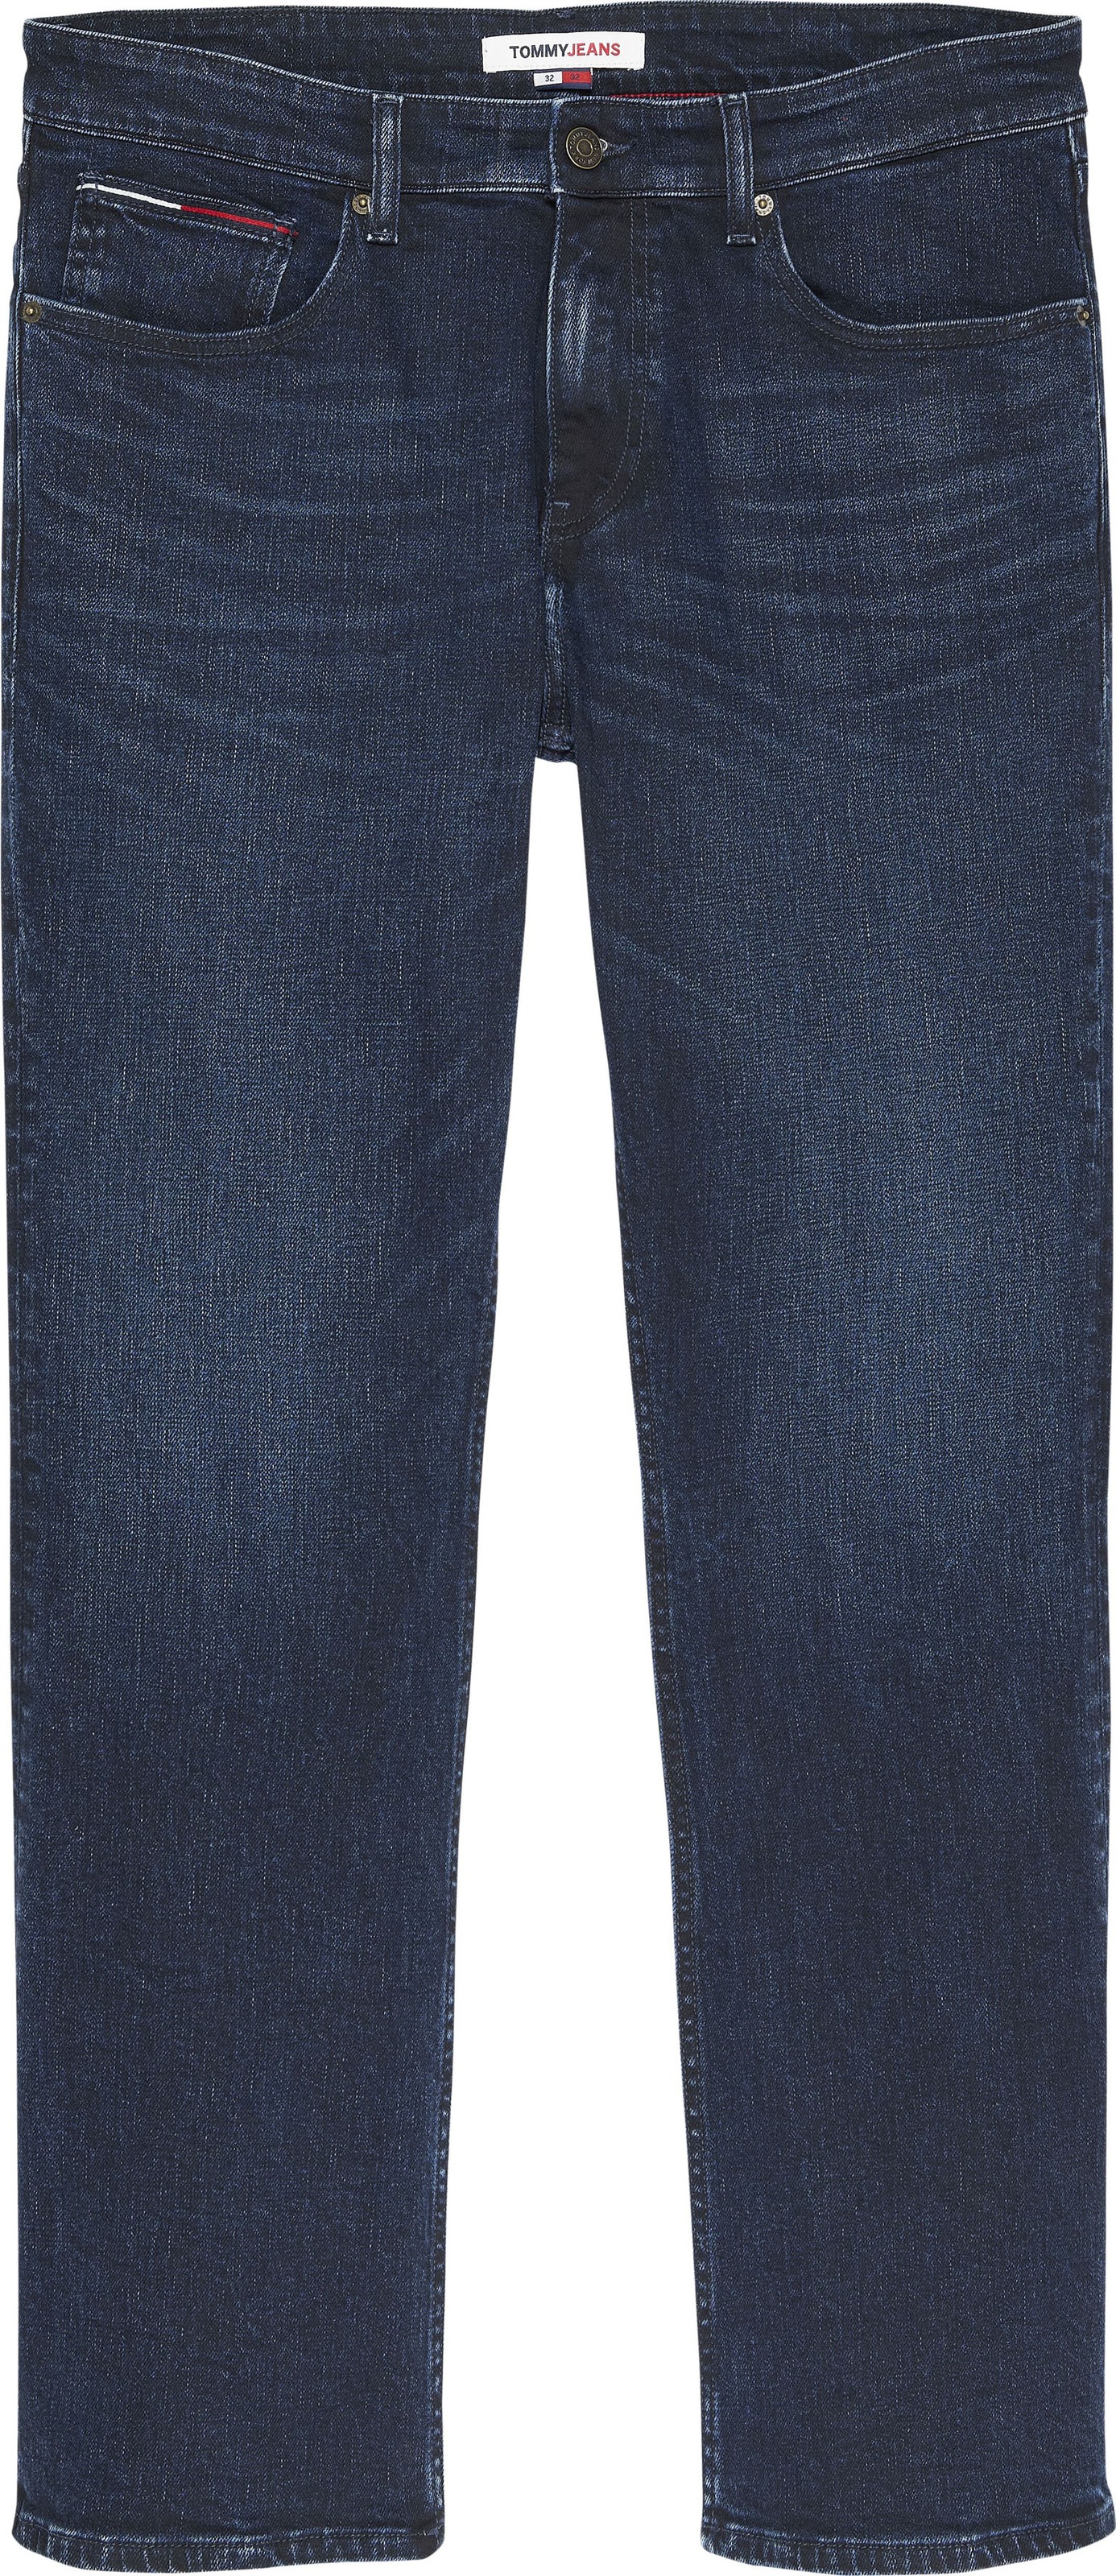 online »RYAN OTTO bei BOOTCUT RGLR Straight-Jeans kaufen Jeans Tommy BE«